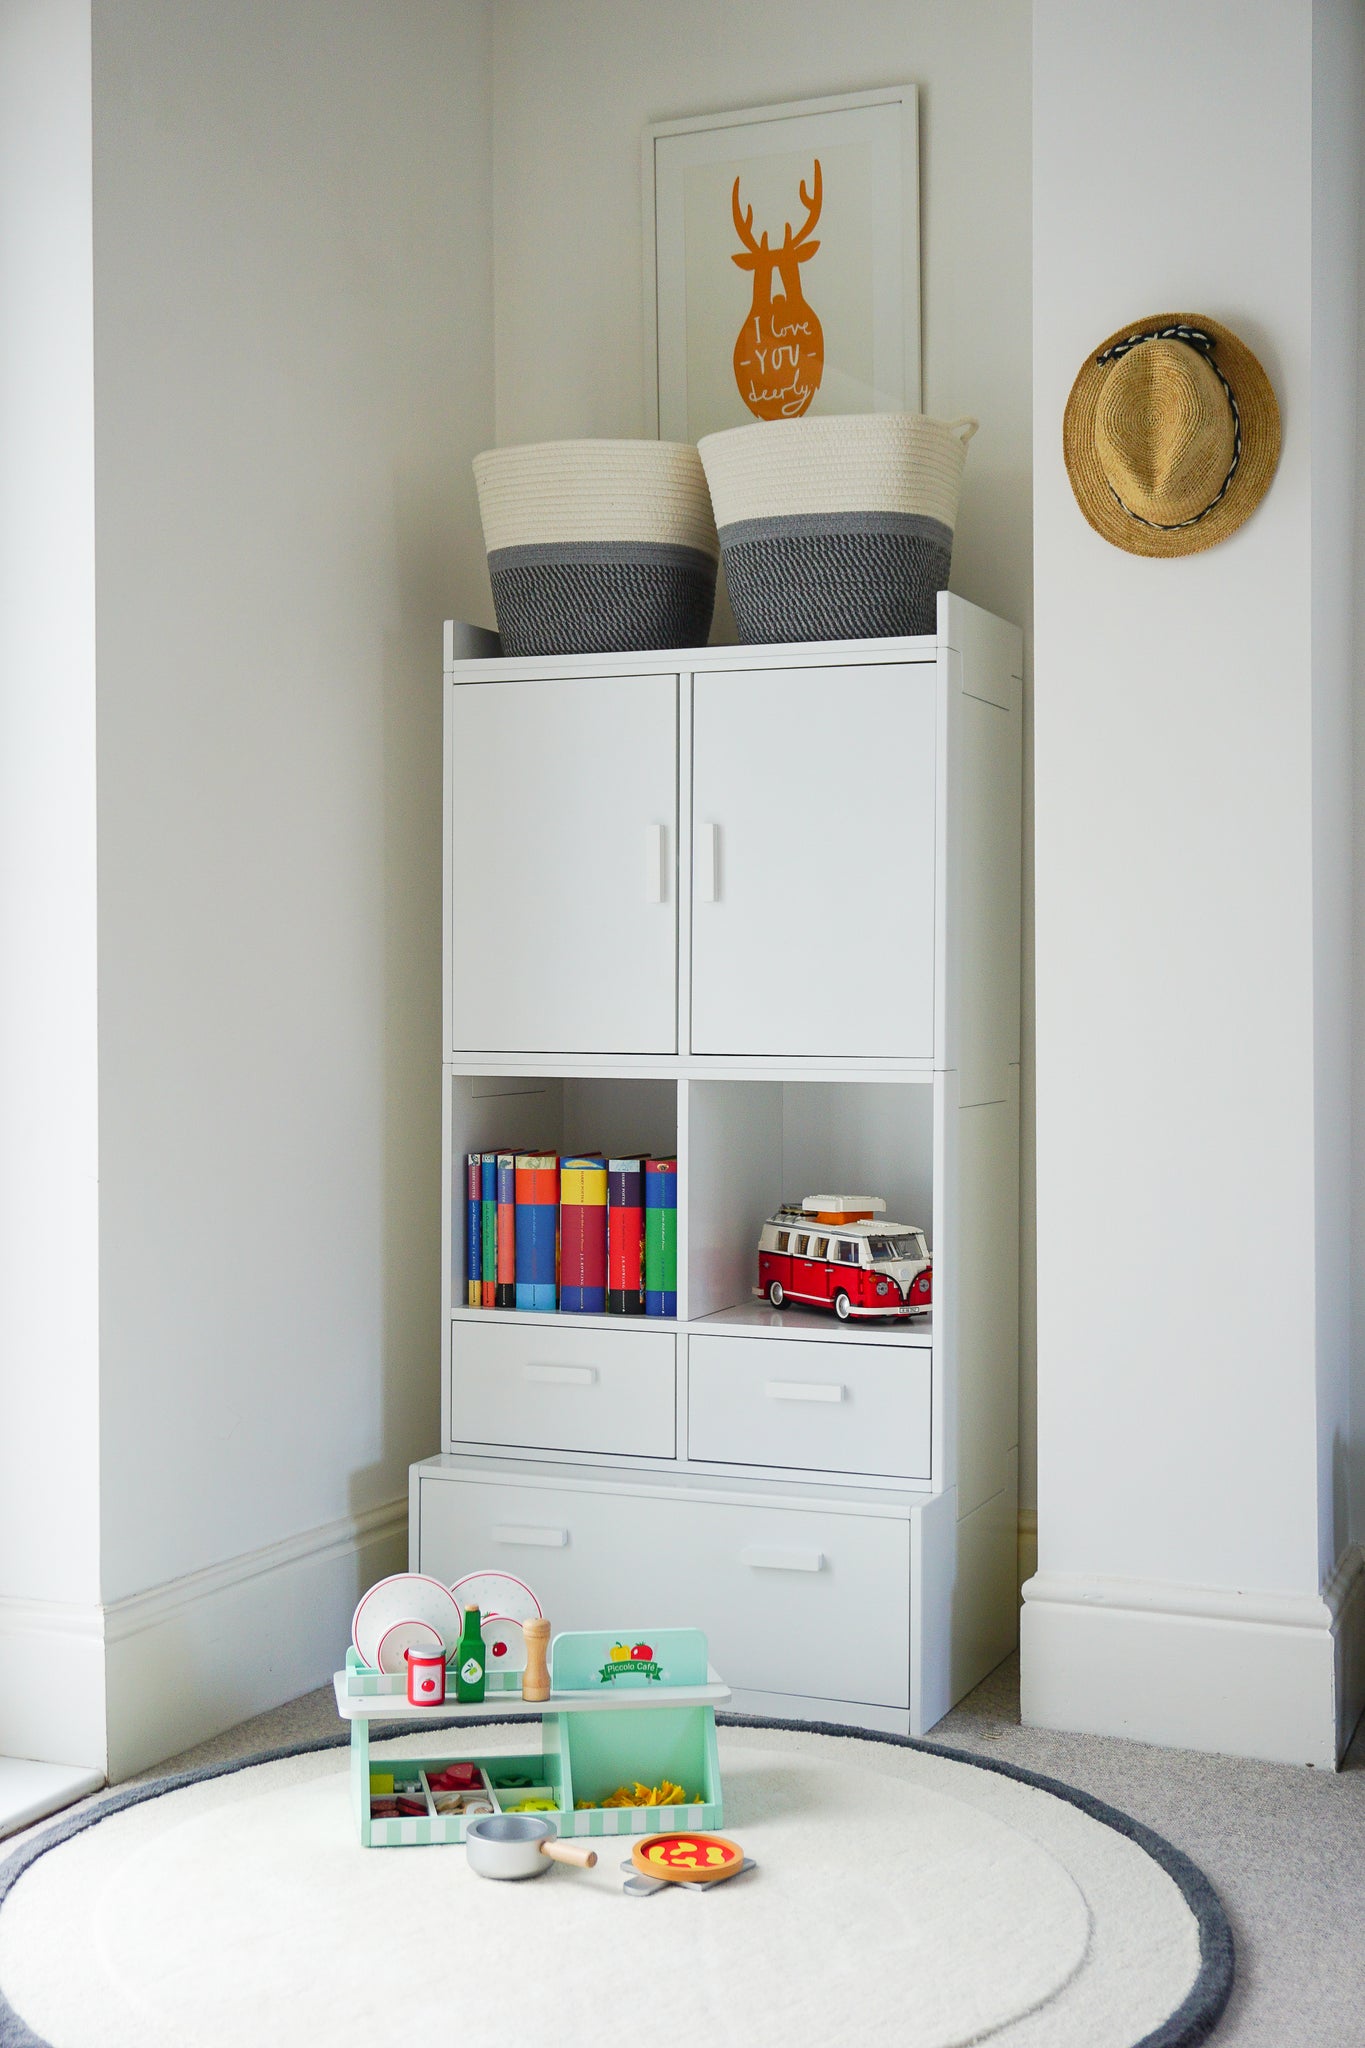 Turn your living room into a shared space with versatile toy storage